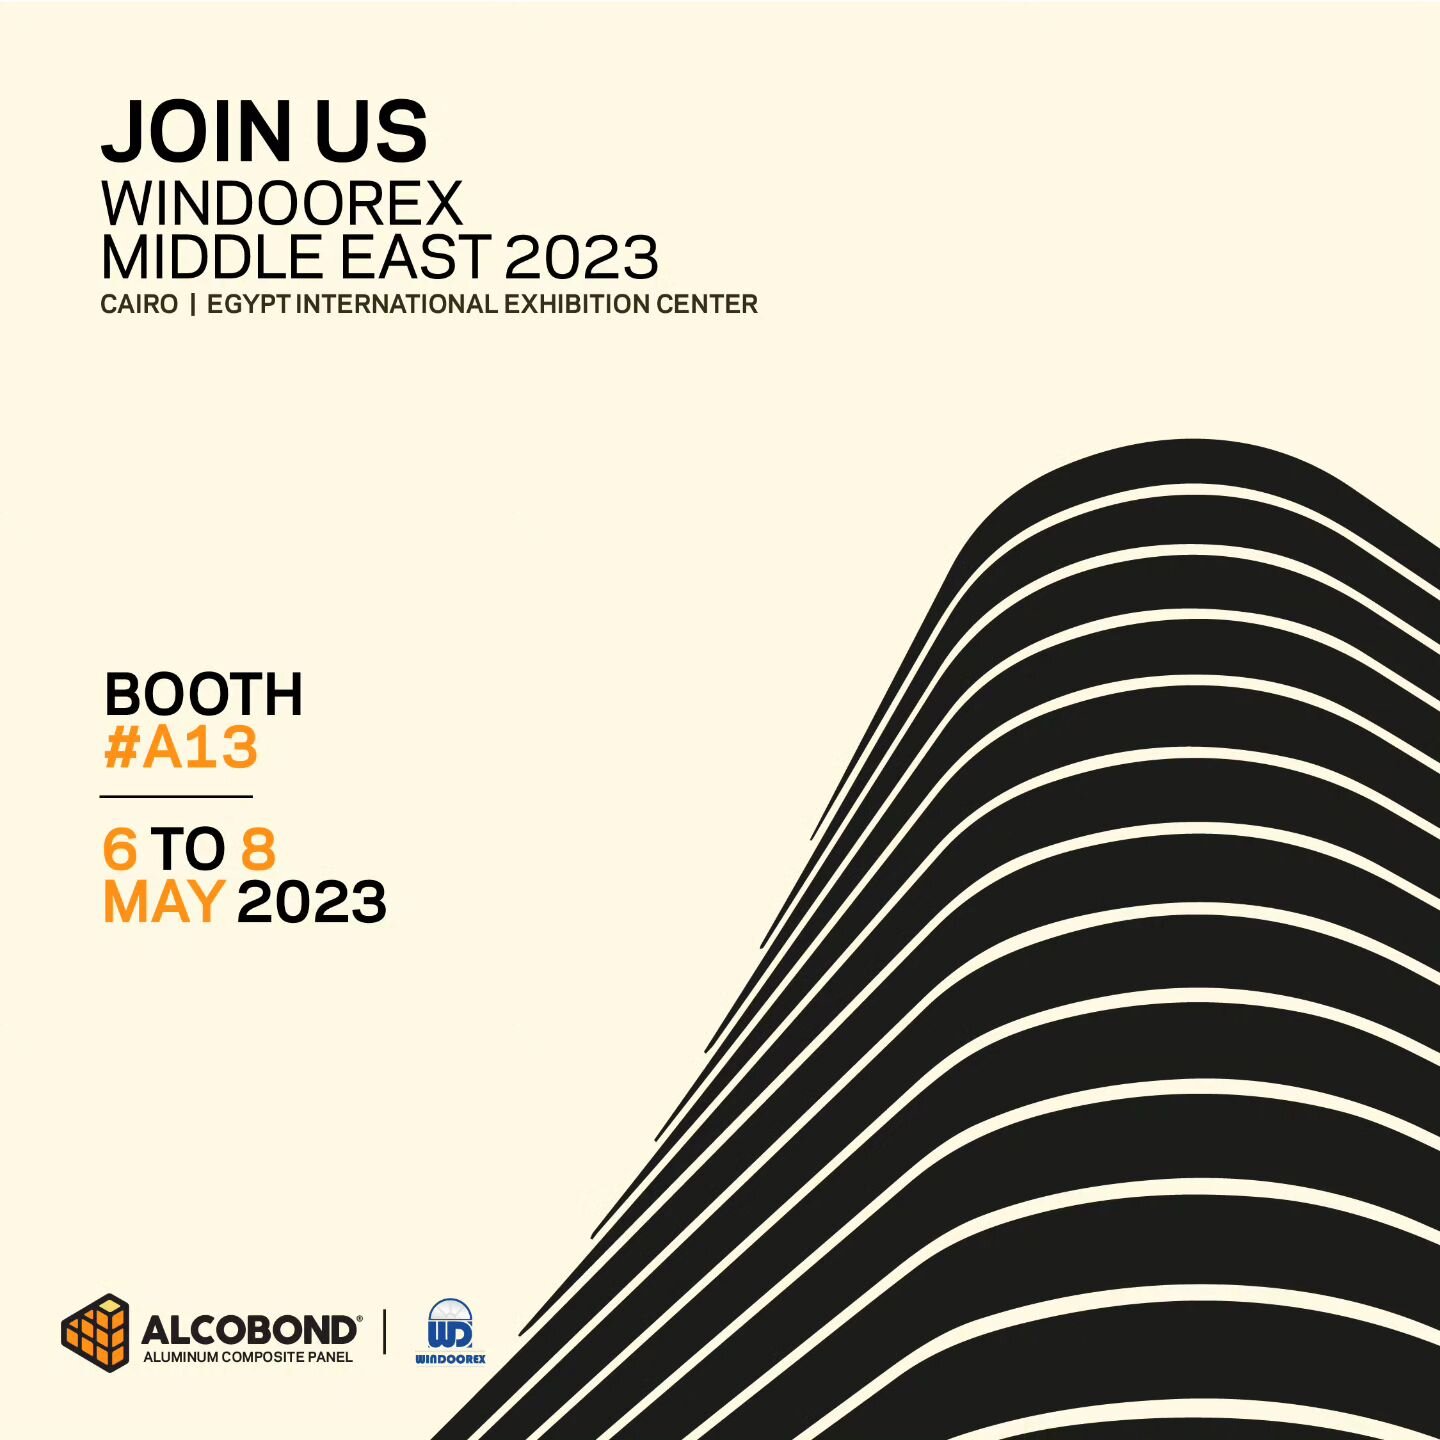 Come and join us at the upcoming 2023 Windoorex Exhibition in Cairo! 

Our team will be there to greet you, discuss our processes, and showcase our range of products.

#Windoorex #Windoorex2023 #Facade #FacadeExhibition #Alcobond